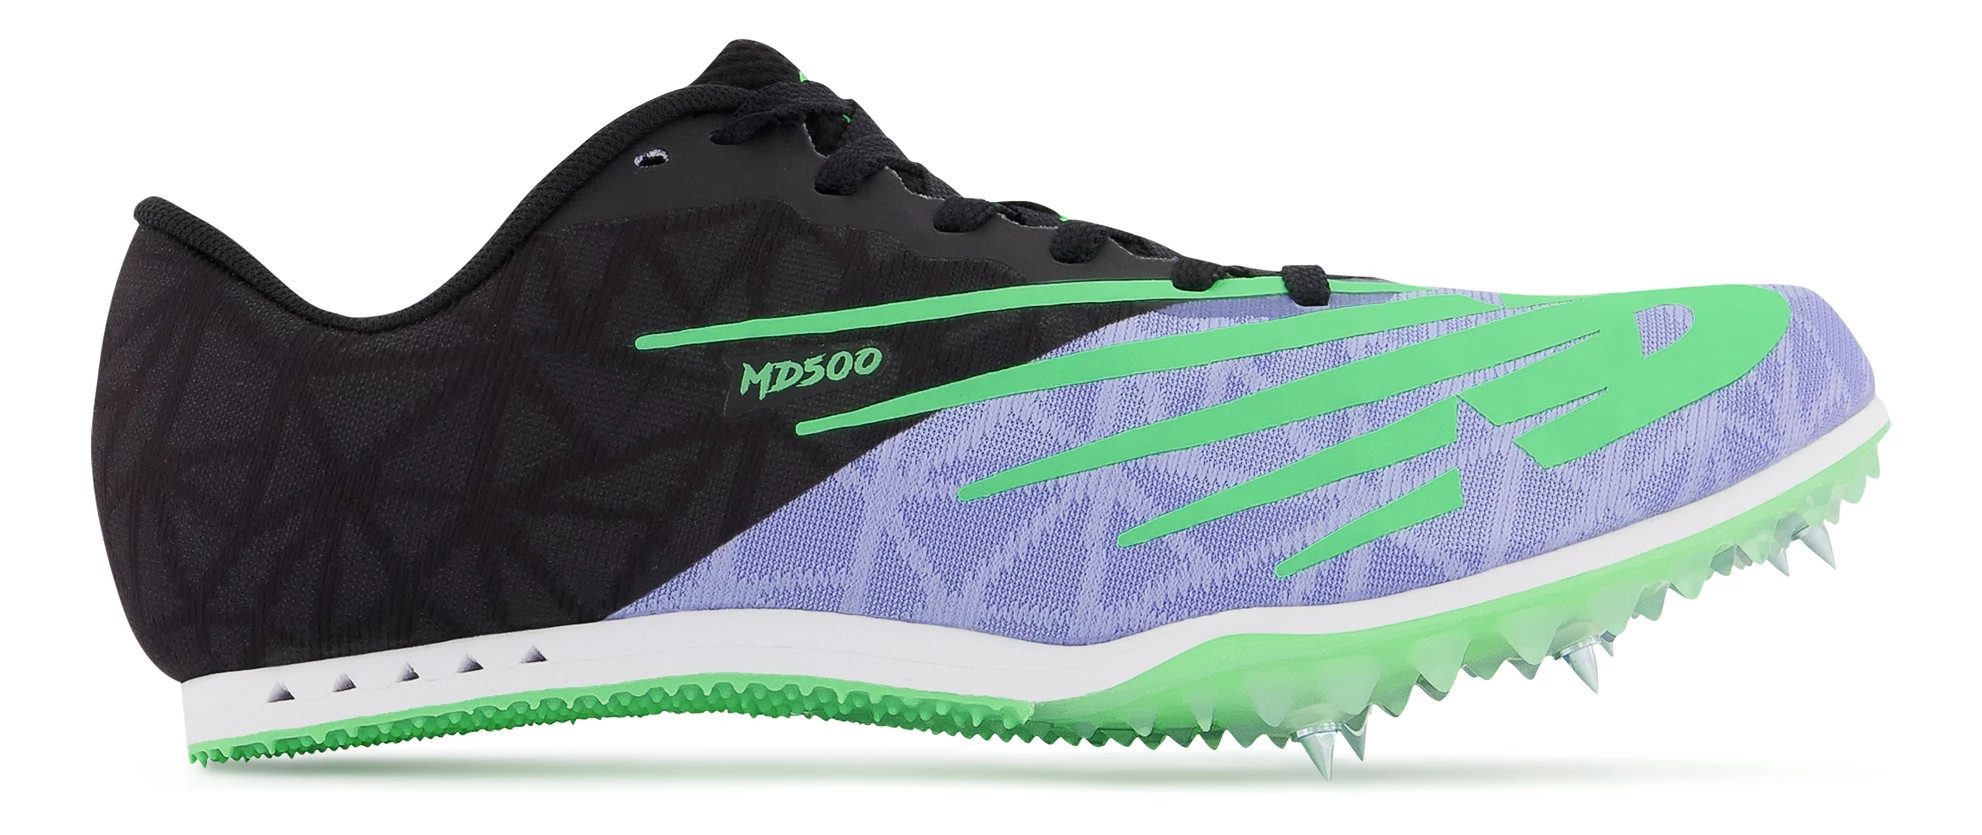 Womens New Balance MD500v8 Track and Field Shoe